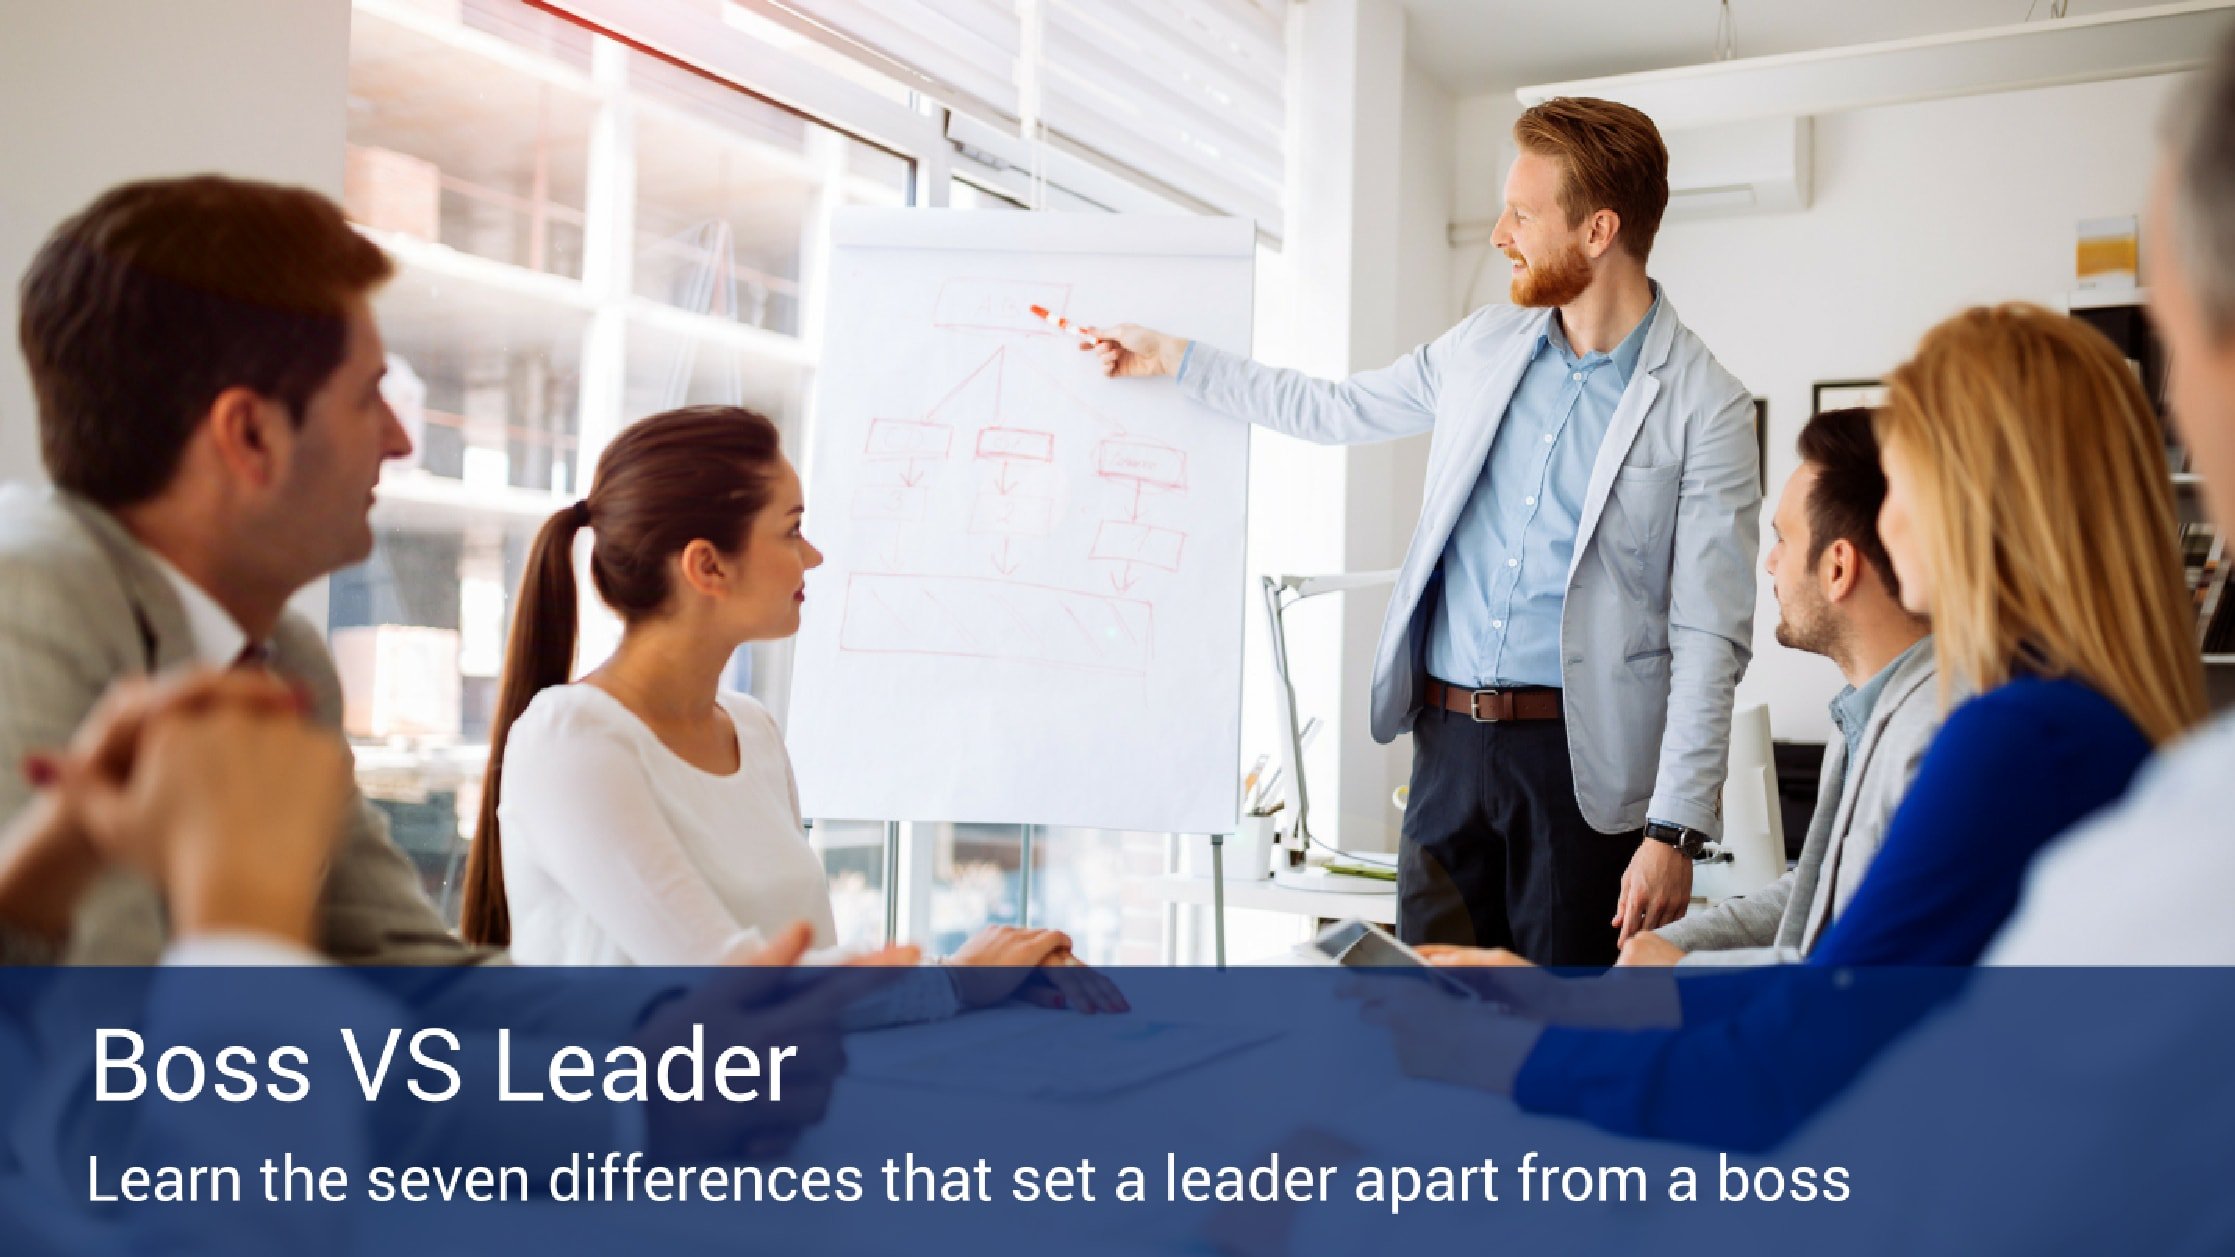 Boss vs Leader: What's the Difference Between a Boss and a Leader?